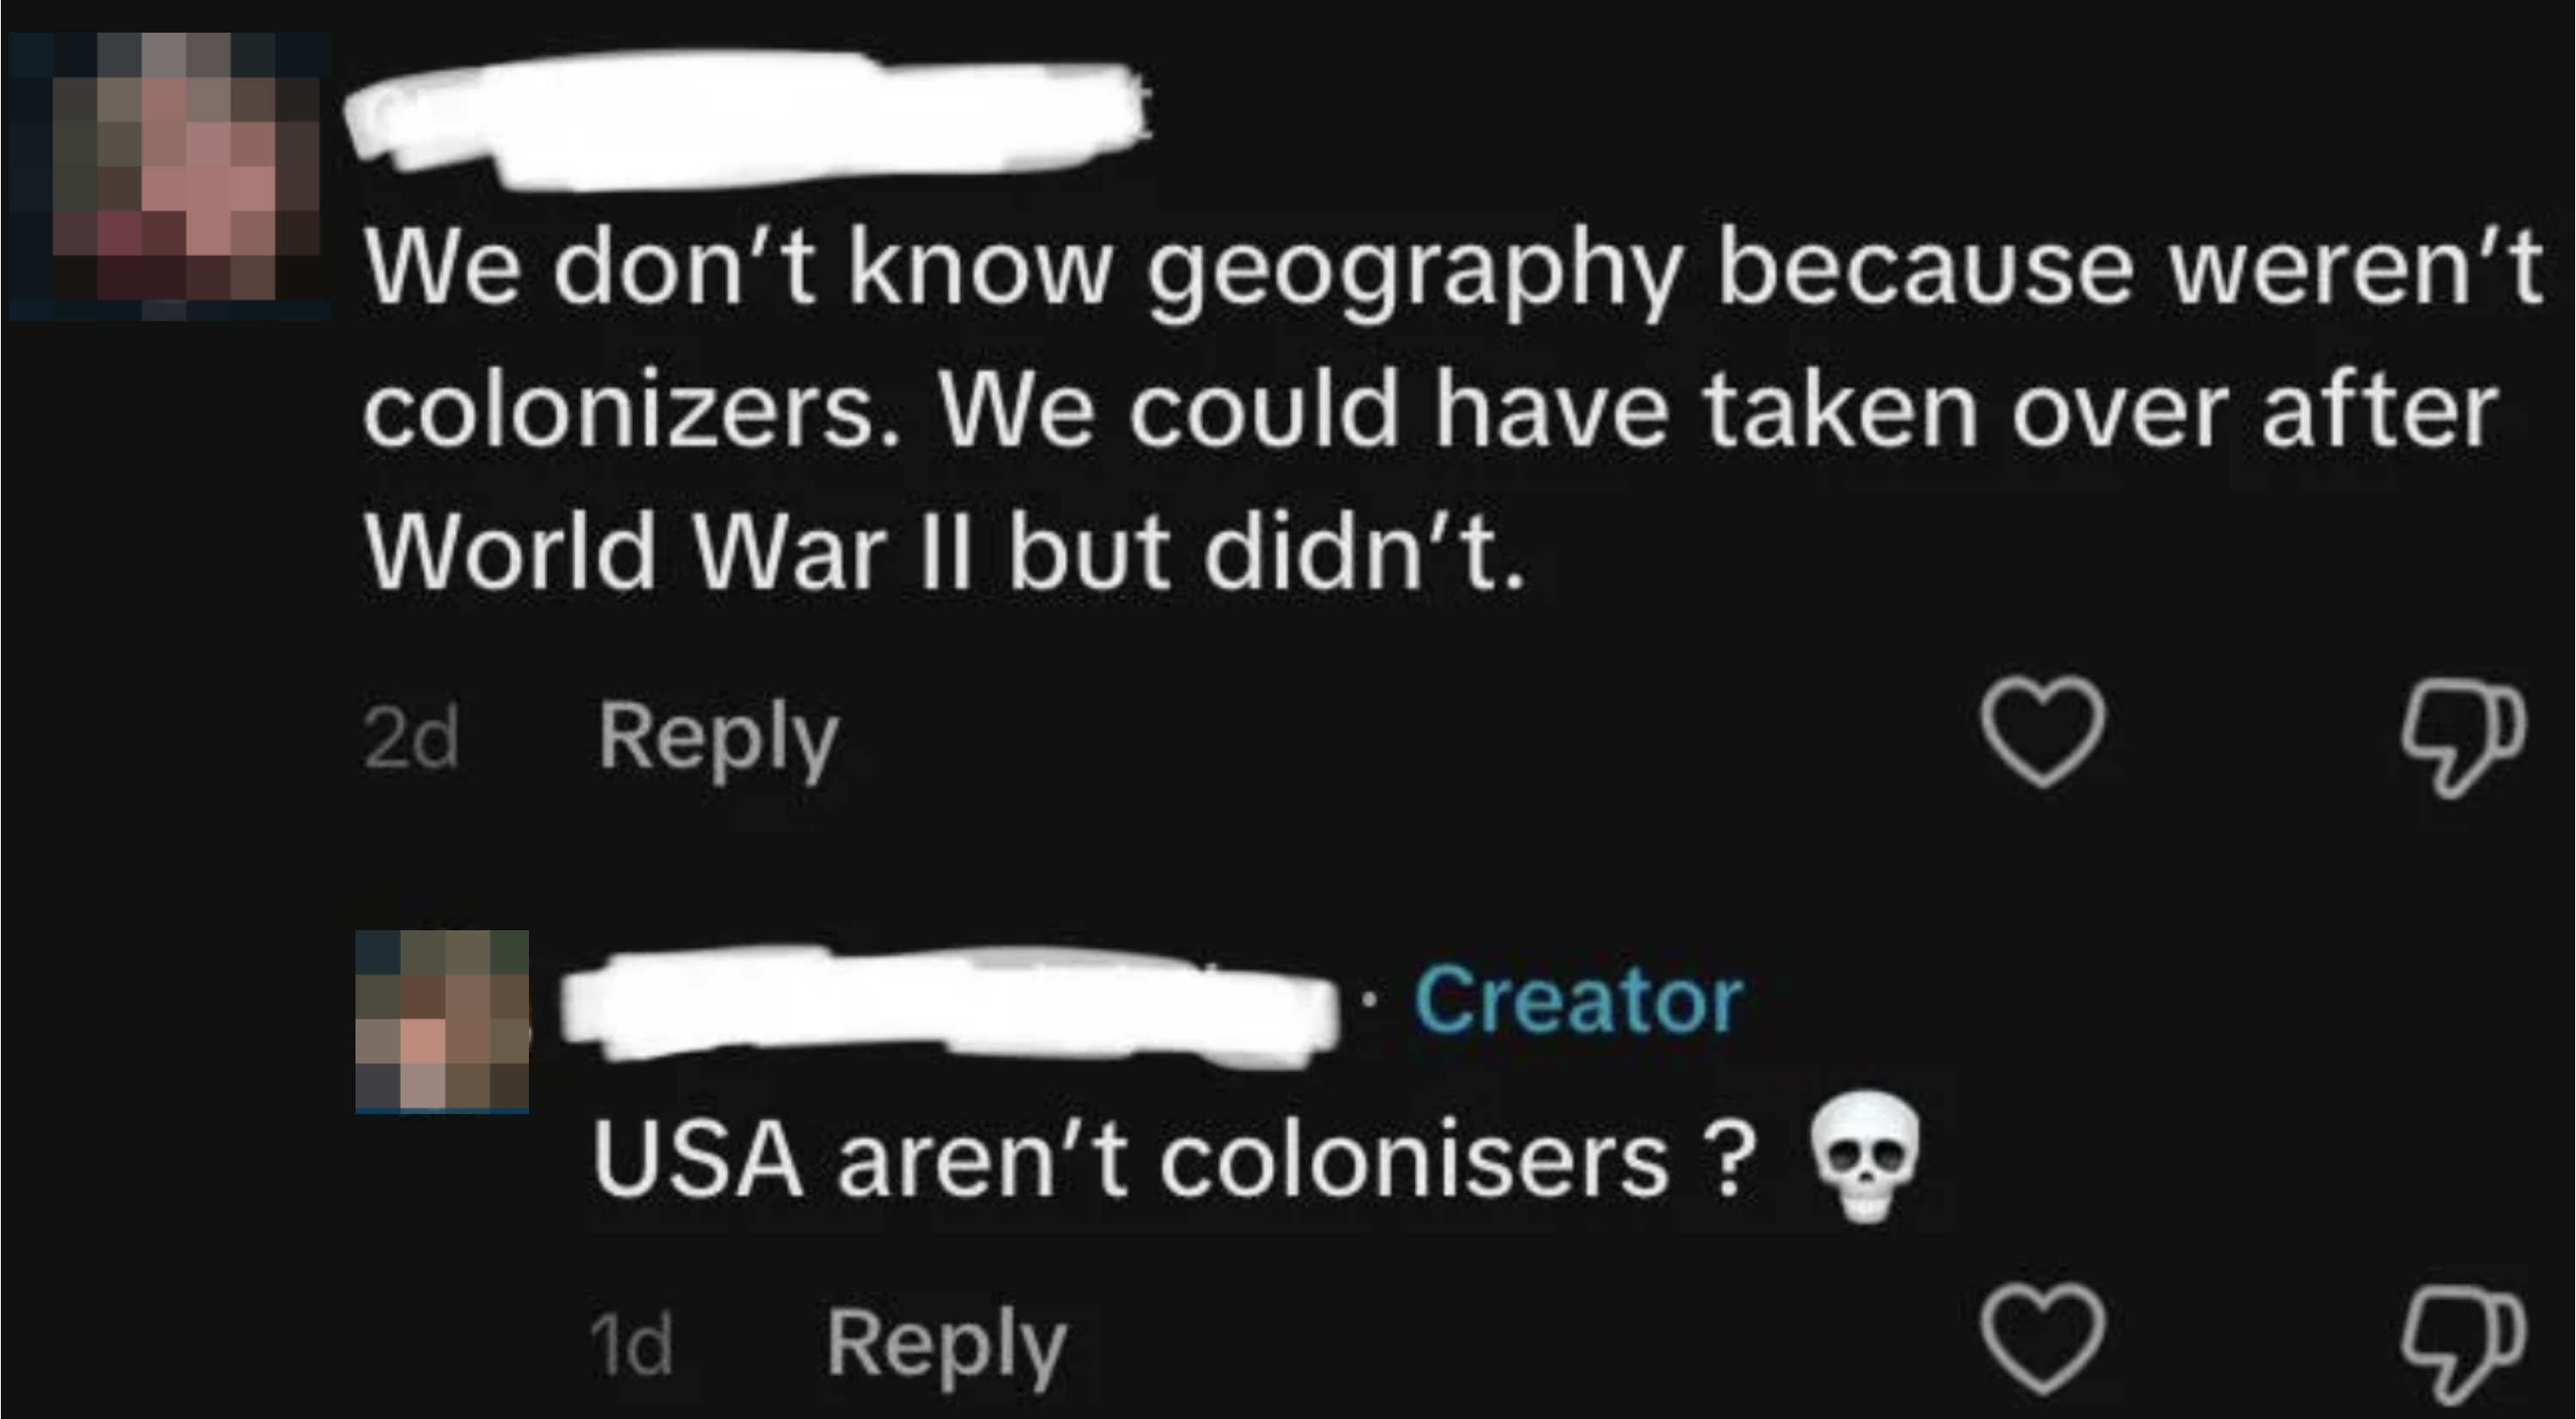 Social media comment exchange: &quot;We don’t know geography because we weren’t colonizers. We could have taken over after World War II but didn’t.” Reply says, “USA aren’t colonisers?”